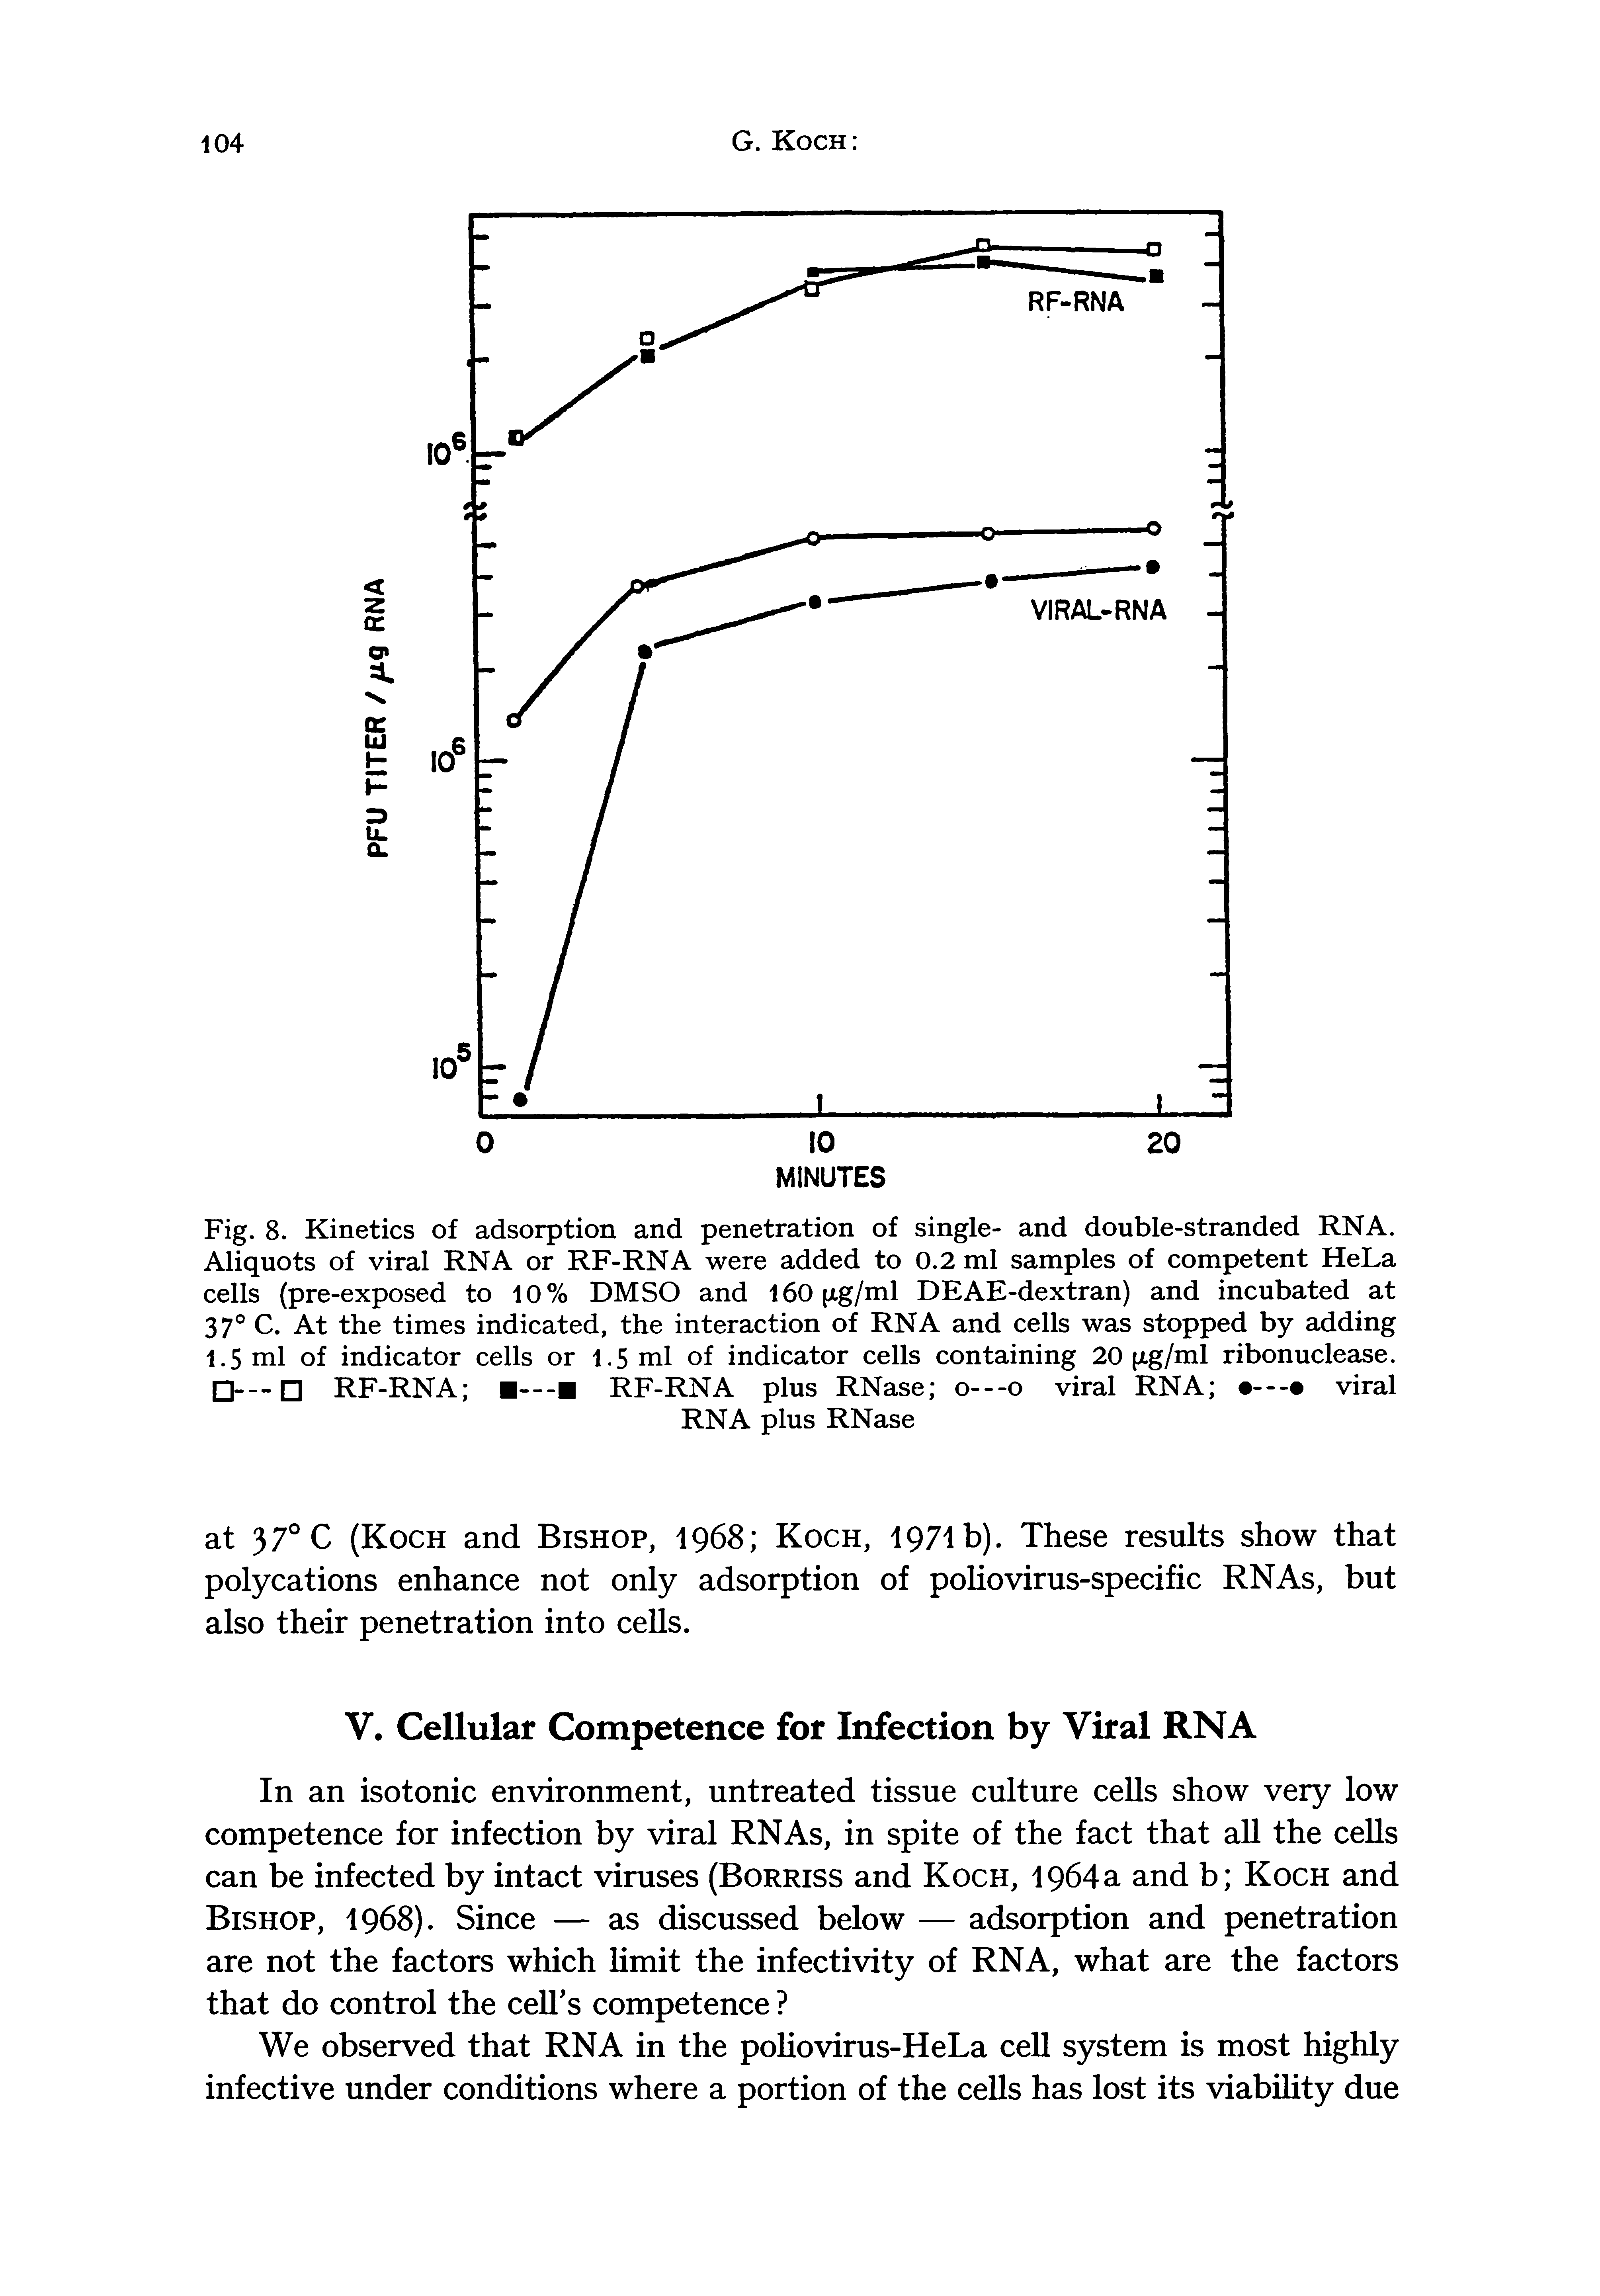 Fig. 8. Kinetics of adsorption and penetration of single- and double-stranded RNA. Aliquots of viral RNA or RF-RNA were added to 0.2 ml samples of competent HeLa cells (pre-exposed to 10% DMSO and 160 xg/ml DEAE-dextran) and incubated at 37° C. At the times indicated, the interaction of RNA and cells was stopped by adding 1.5 ml of indicator cells or 1.5 ml of indicator cells containing 20 (xg/ml ribonuclease. — RF-RNA RF-RNA plus RNase o---o viral RNA viral...